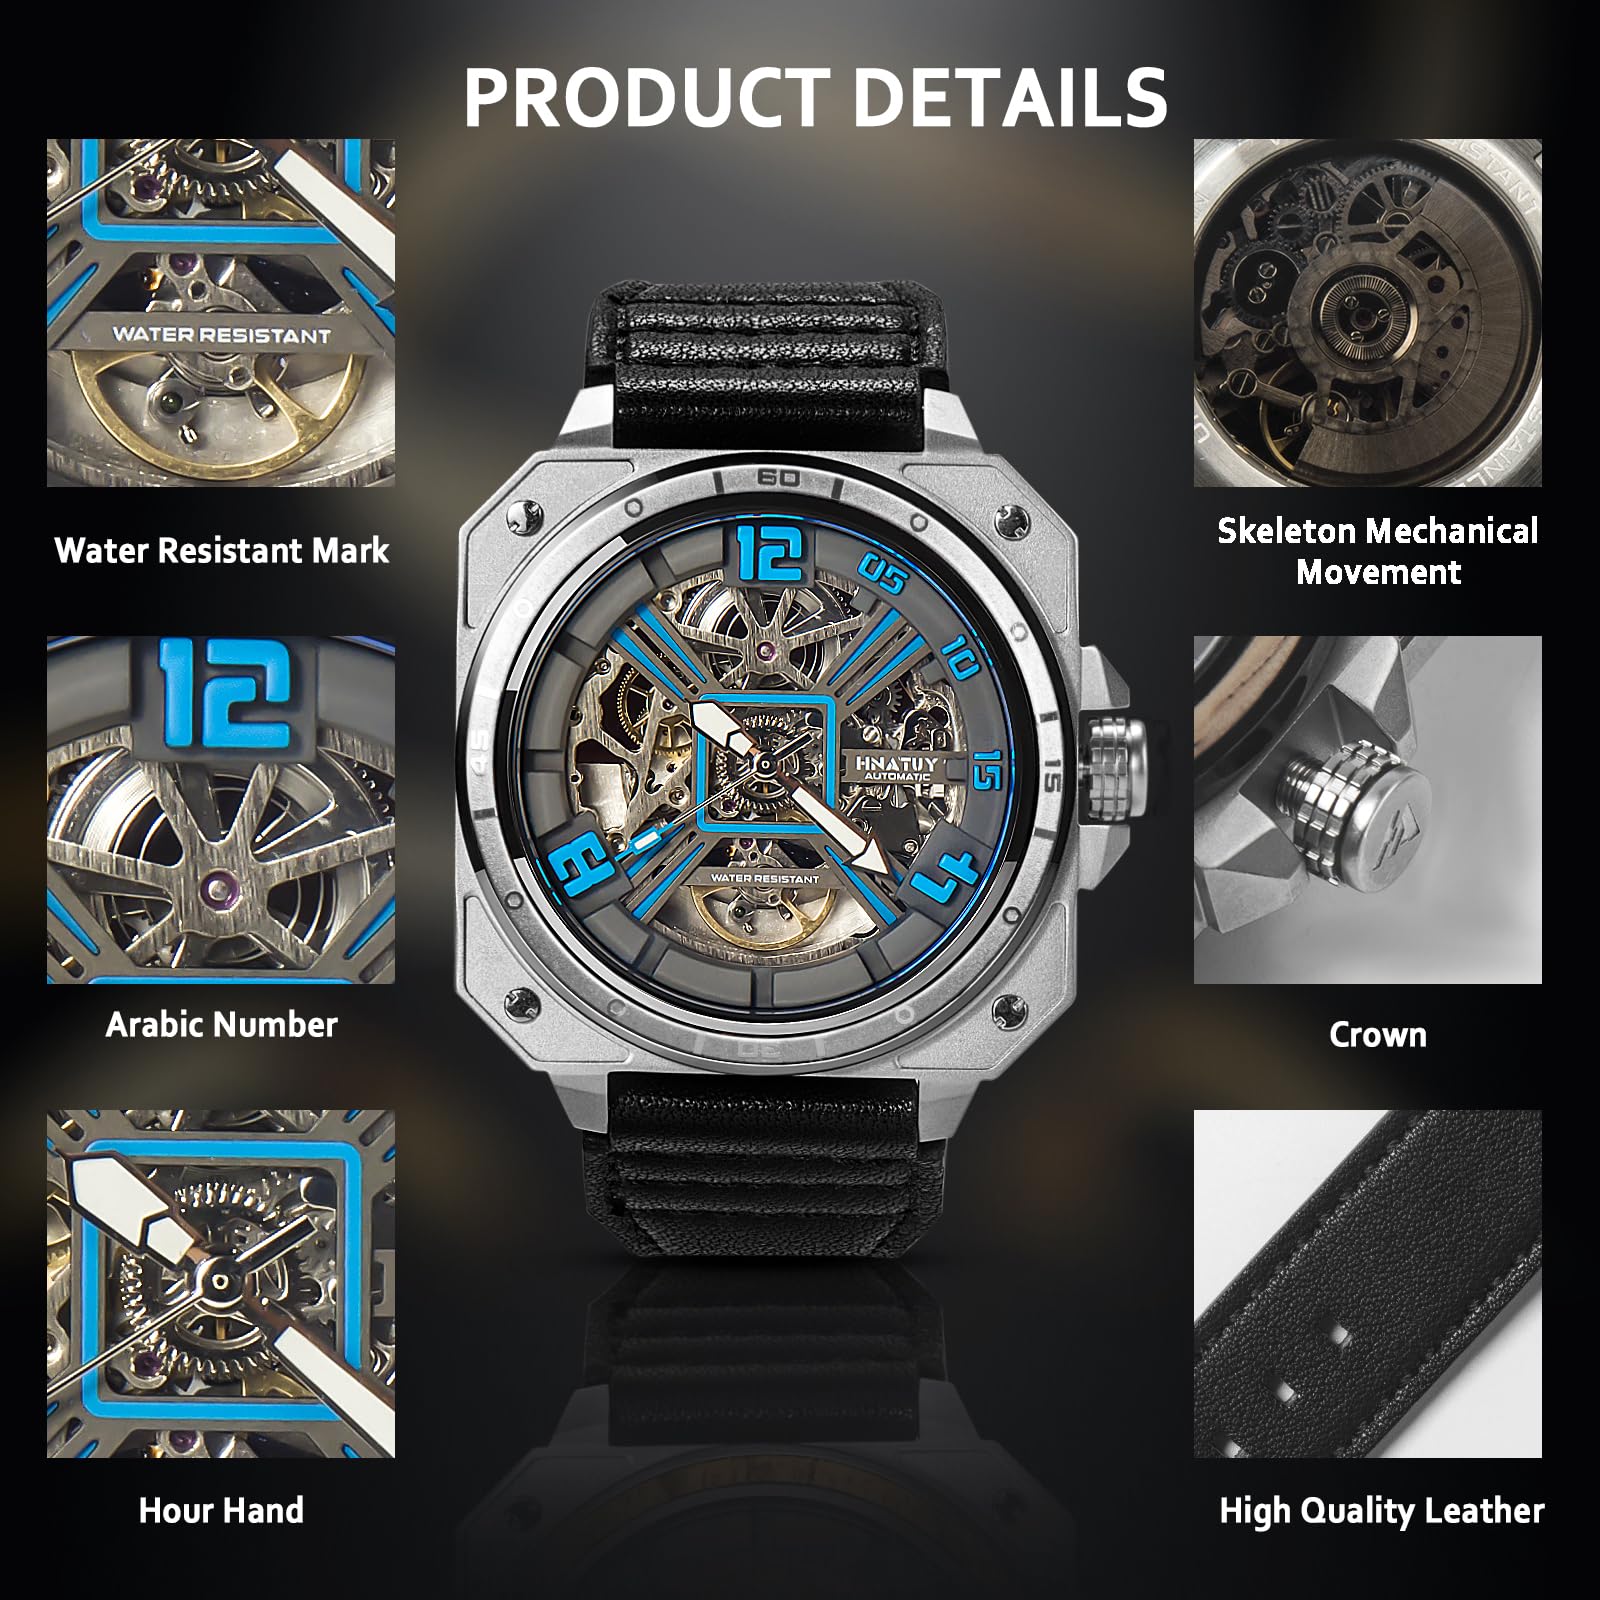 GEFTZRD Automatic Watches for Men,Stainless Steel Case with Leather Band,50M Waterproof Men Mechanical Wrist Watches